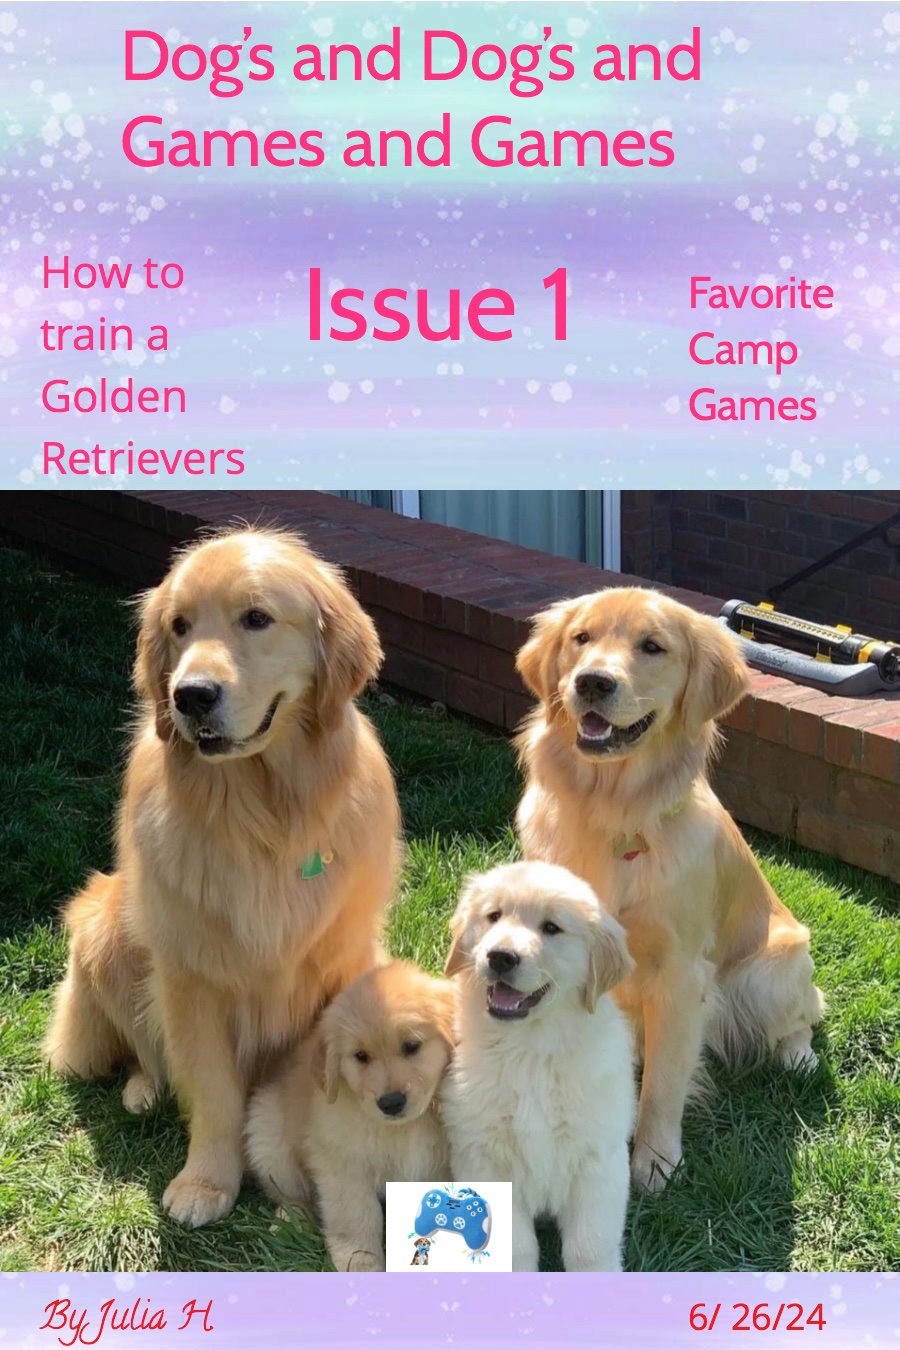 Dogs and Dogs and Games and Games by Julia H